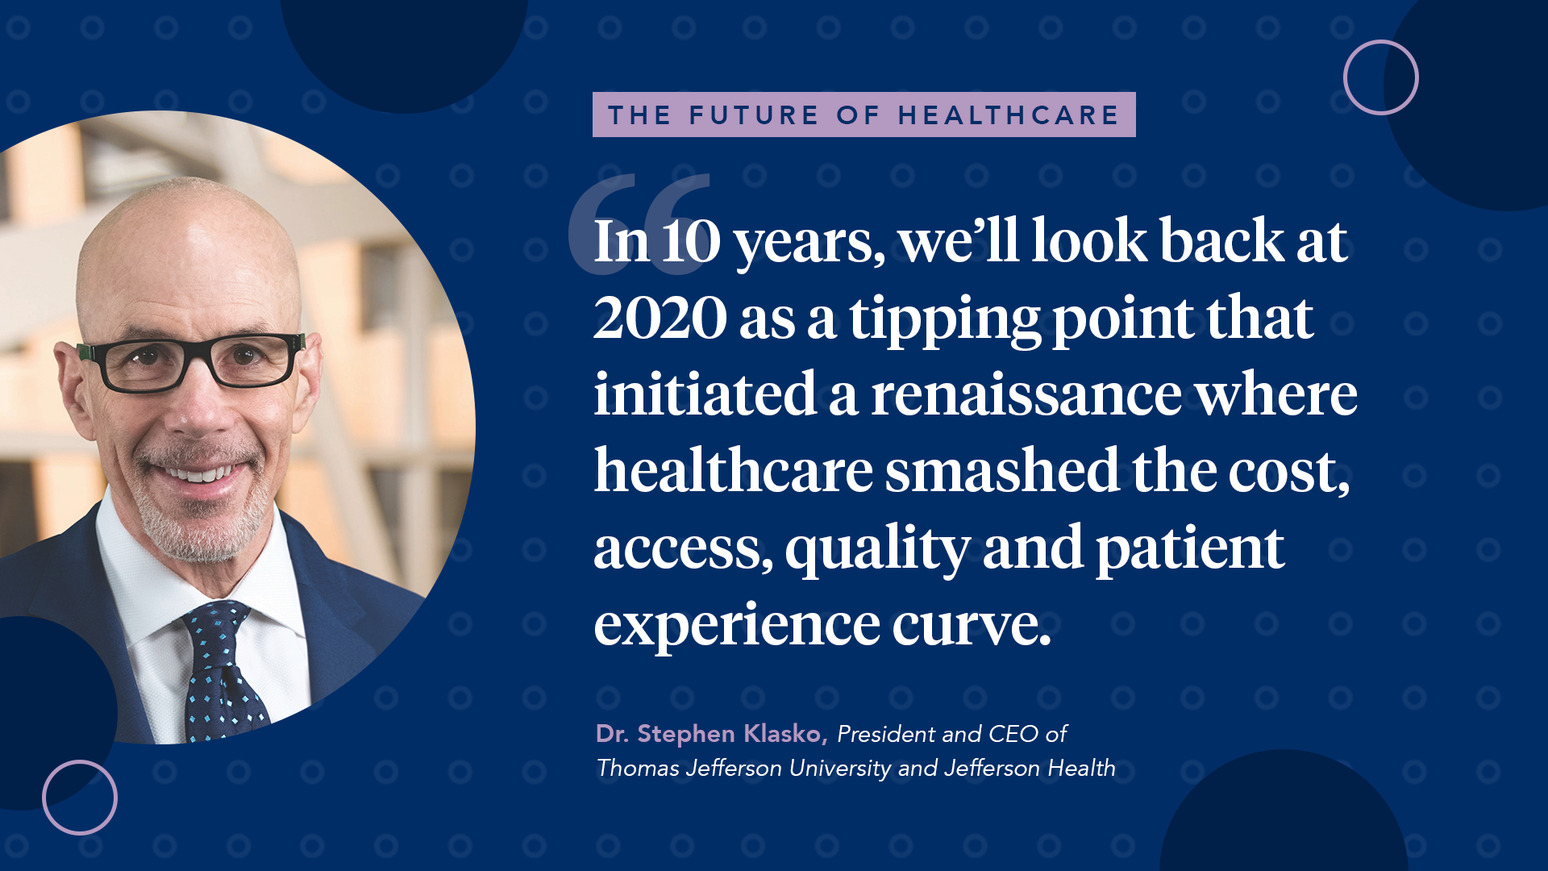 The future of healthcare with Dr. Stephen Klasko